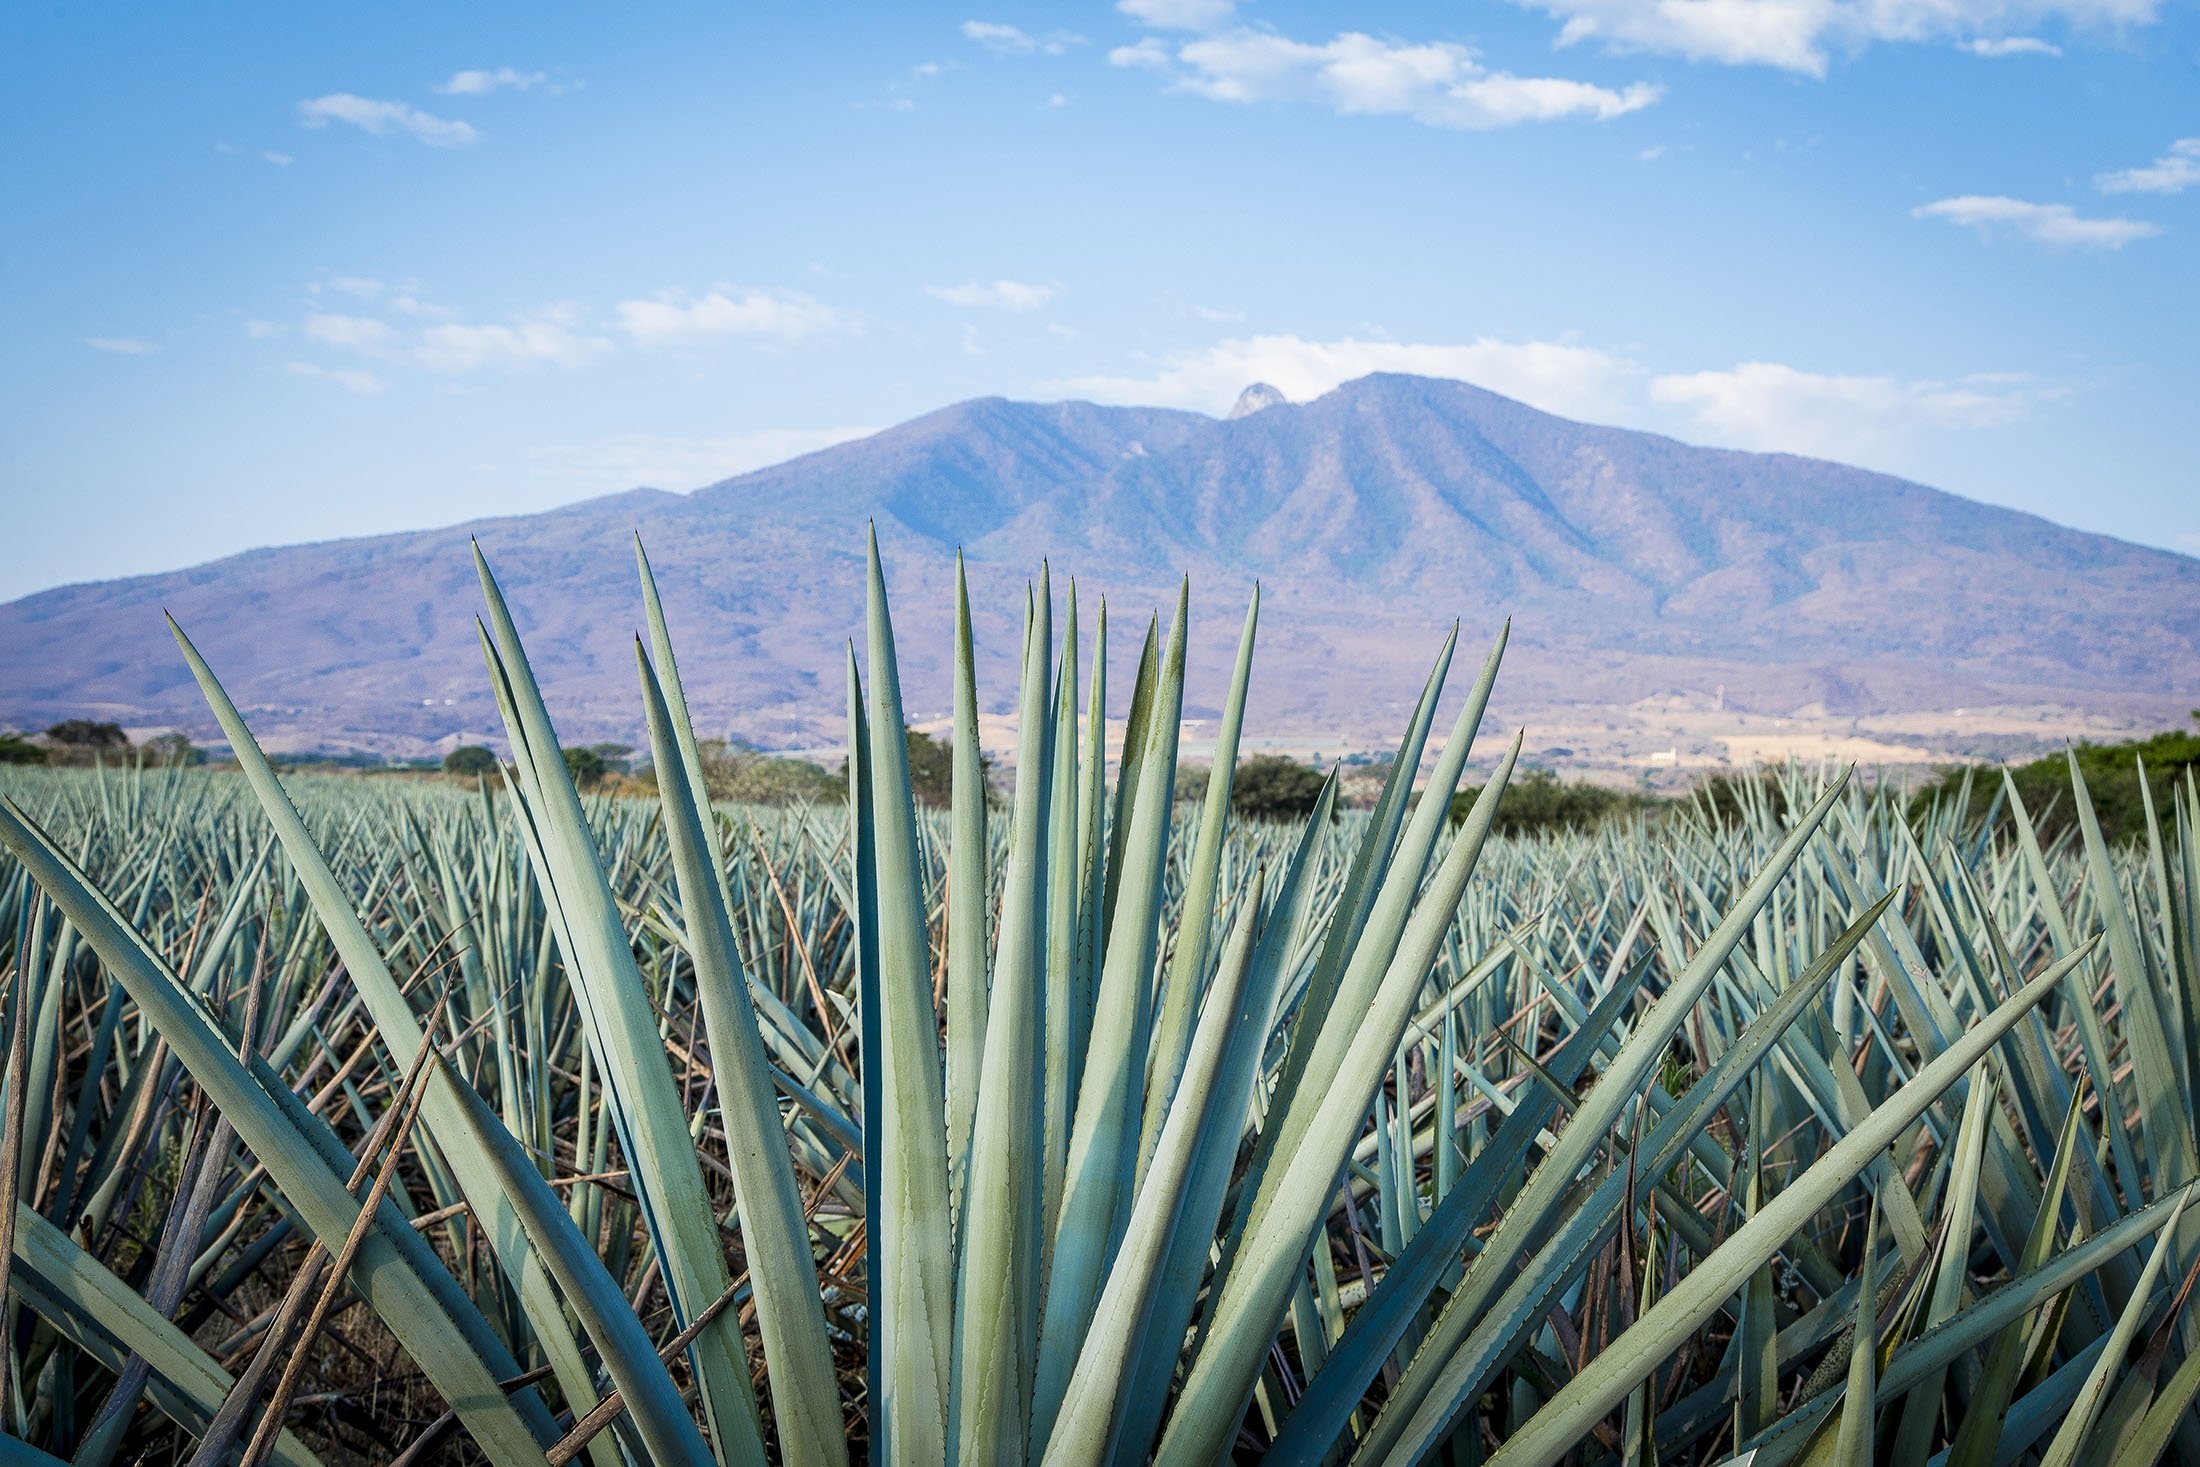 Agave tequila landscape can be seen, in Guadalajara, Jalisco, Mexico.